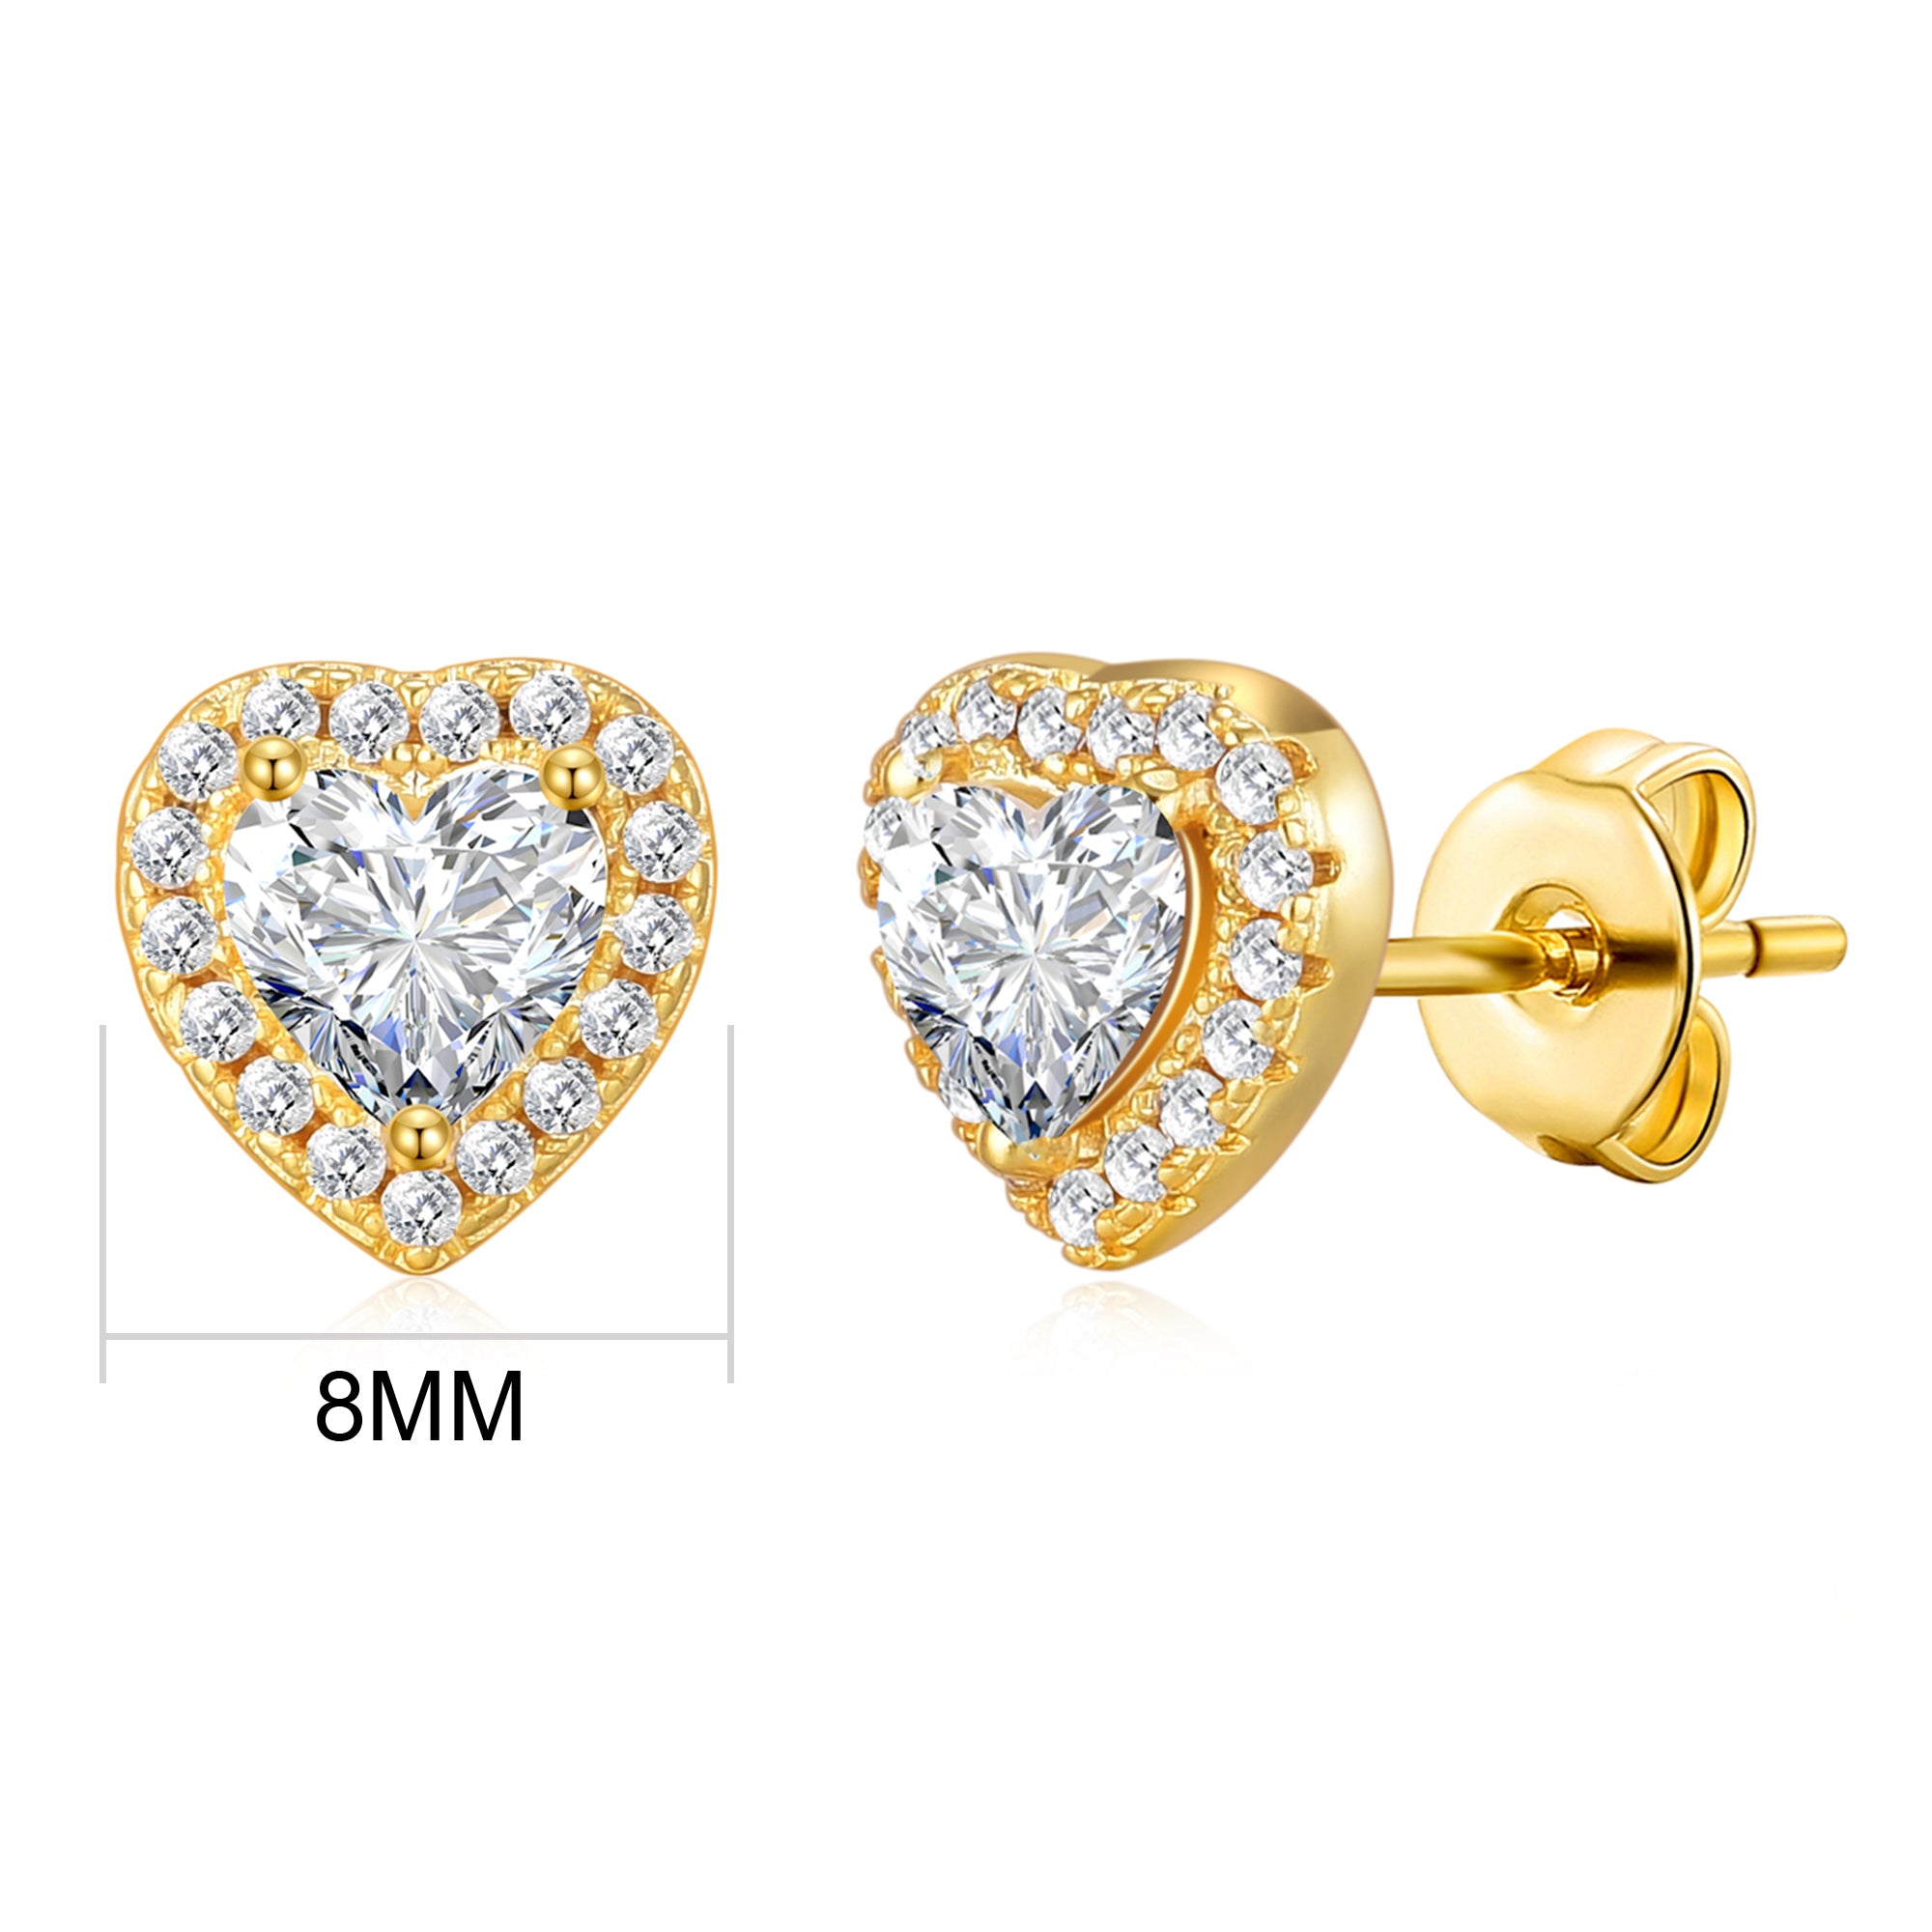 Gold Plated Heart Halo Earrings Created with Zircondia® Crystals